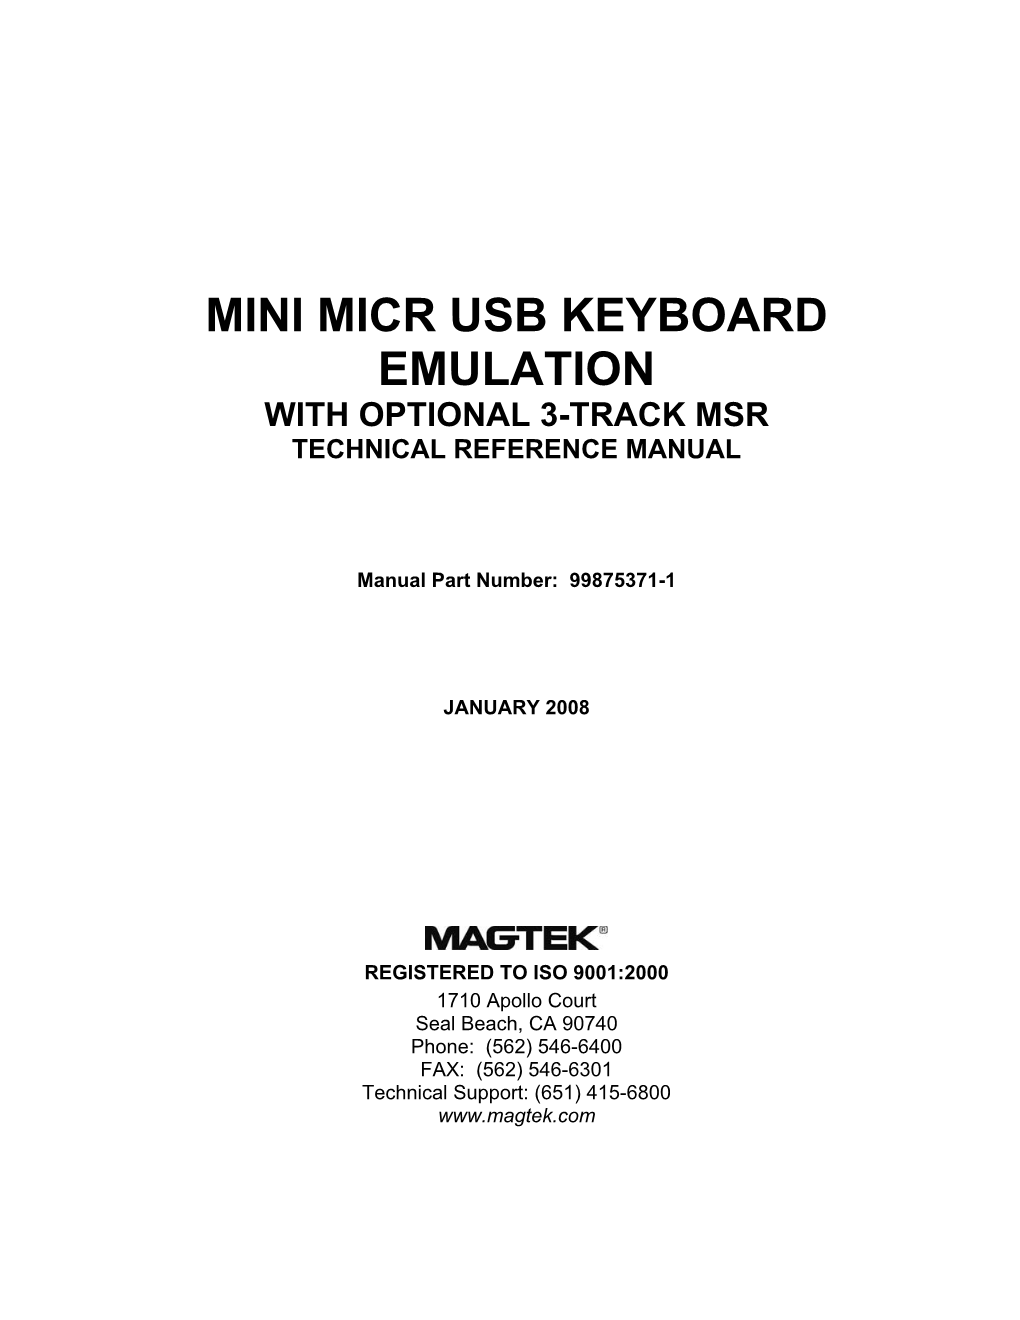 Mini Micr Usb Keyboard Emulation with Optional 3-Track Msr Technical Reference Manual